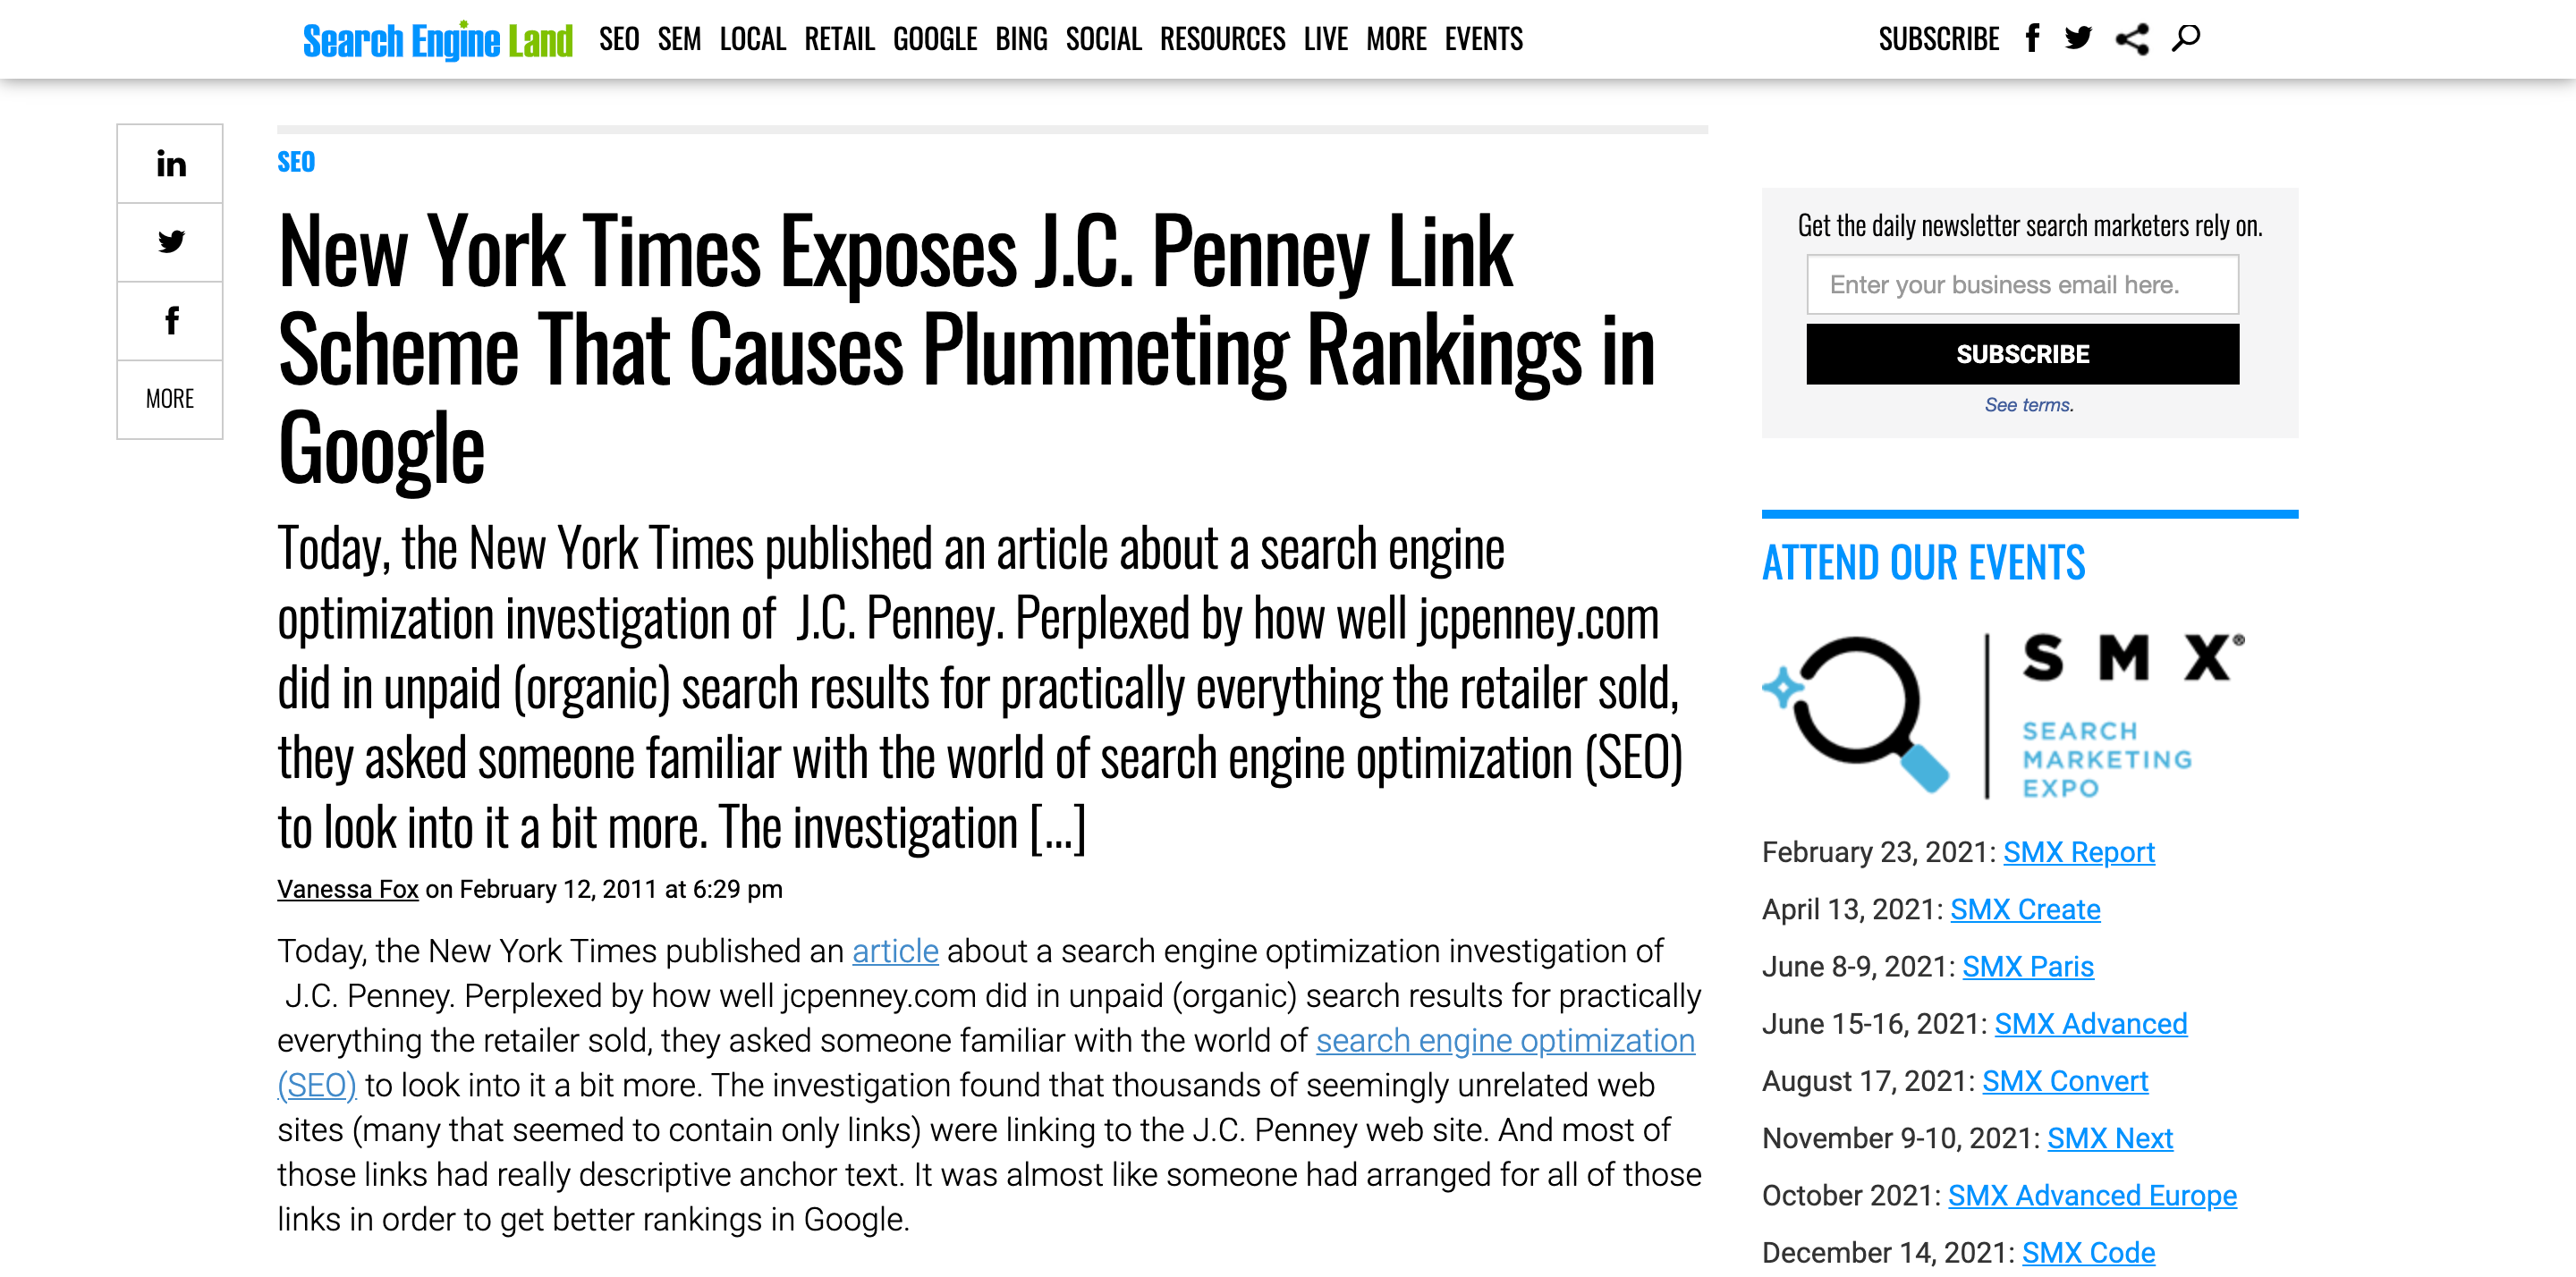 New-York-Times-Exposes-J-C-Penney-Link-Scheme-That-Causes-Plummeting-Rankings-in-Google - Agency Jet